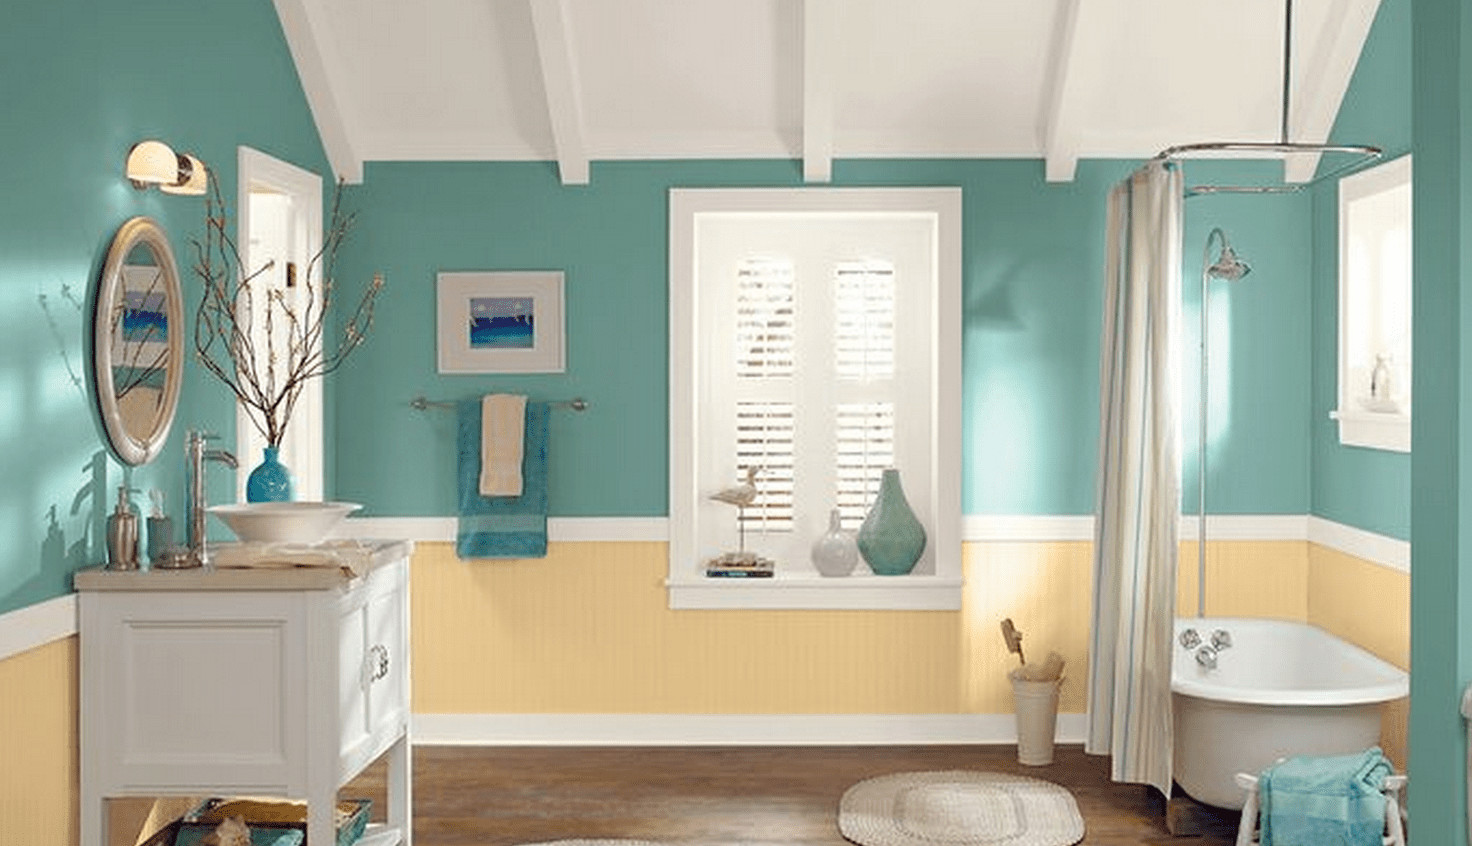 Paint Colors For A Bathroom
 7 Colors That Work Well for Painting a Bathroom